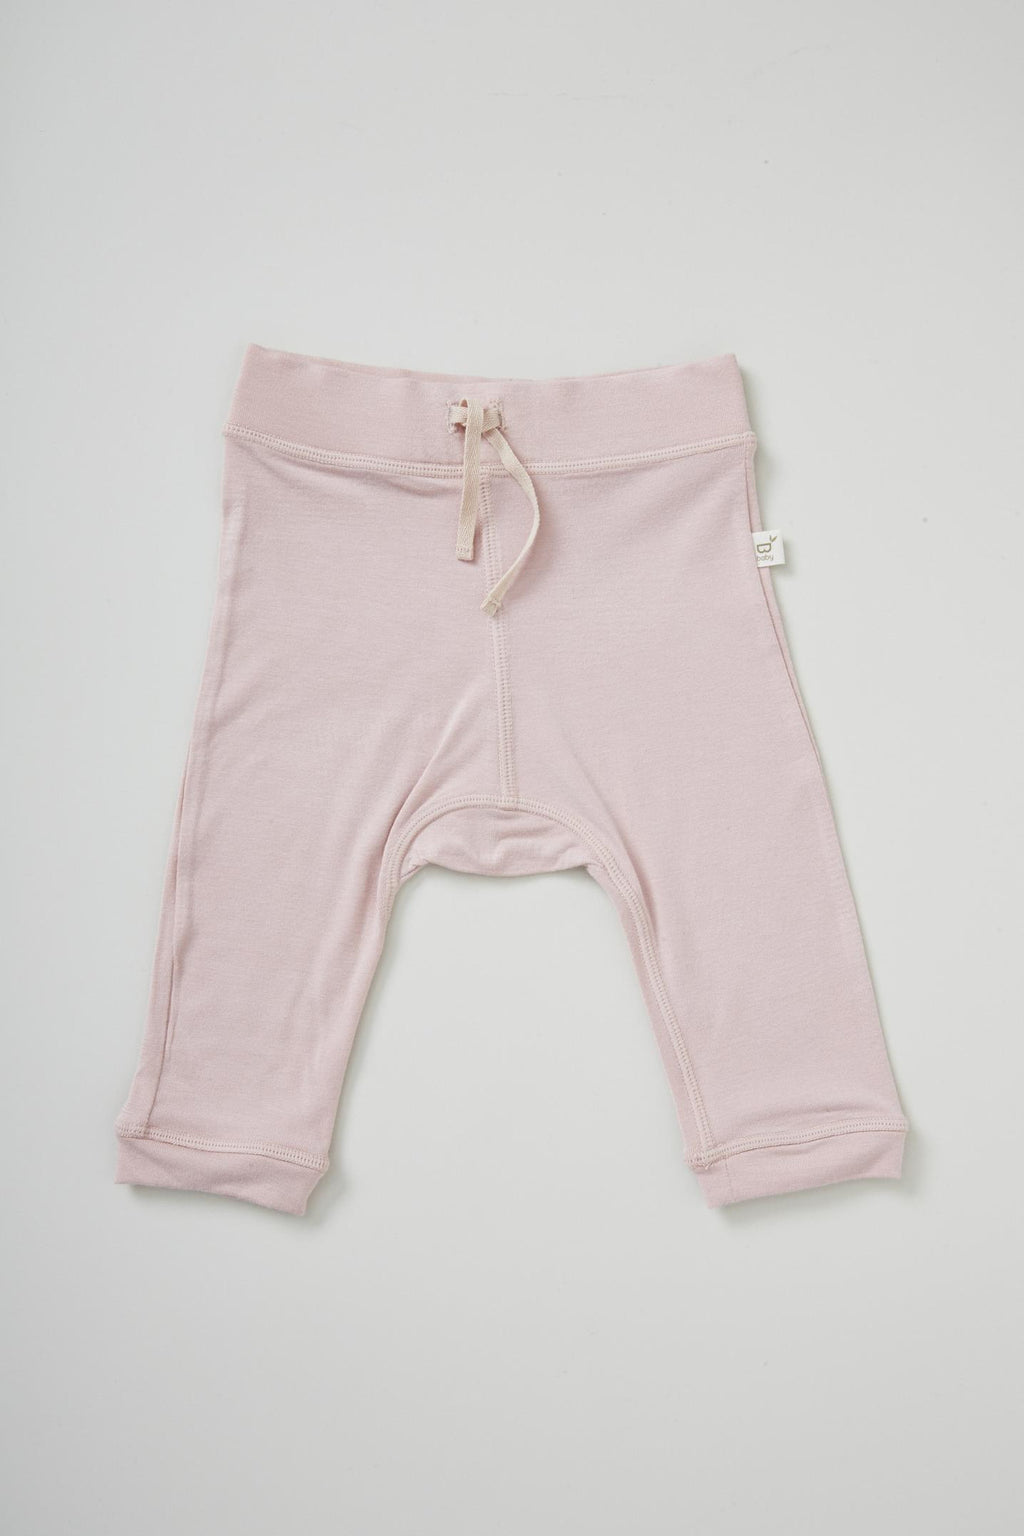 Boody Baby Pull On Pant Rose 12-18mth